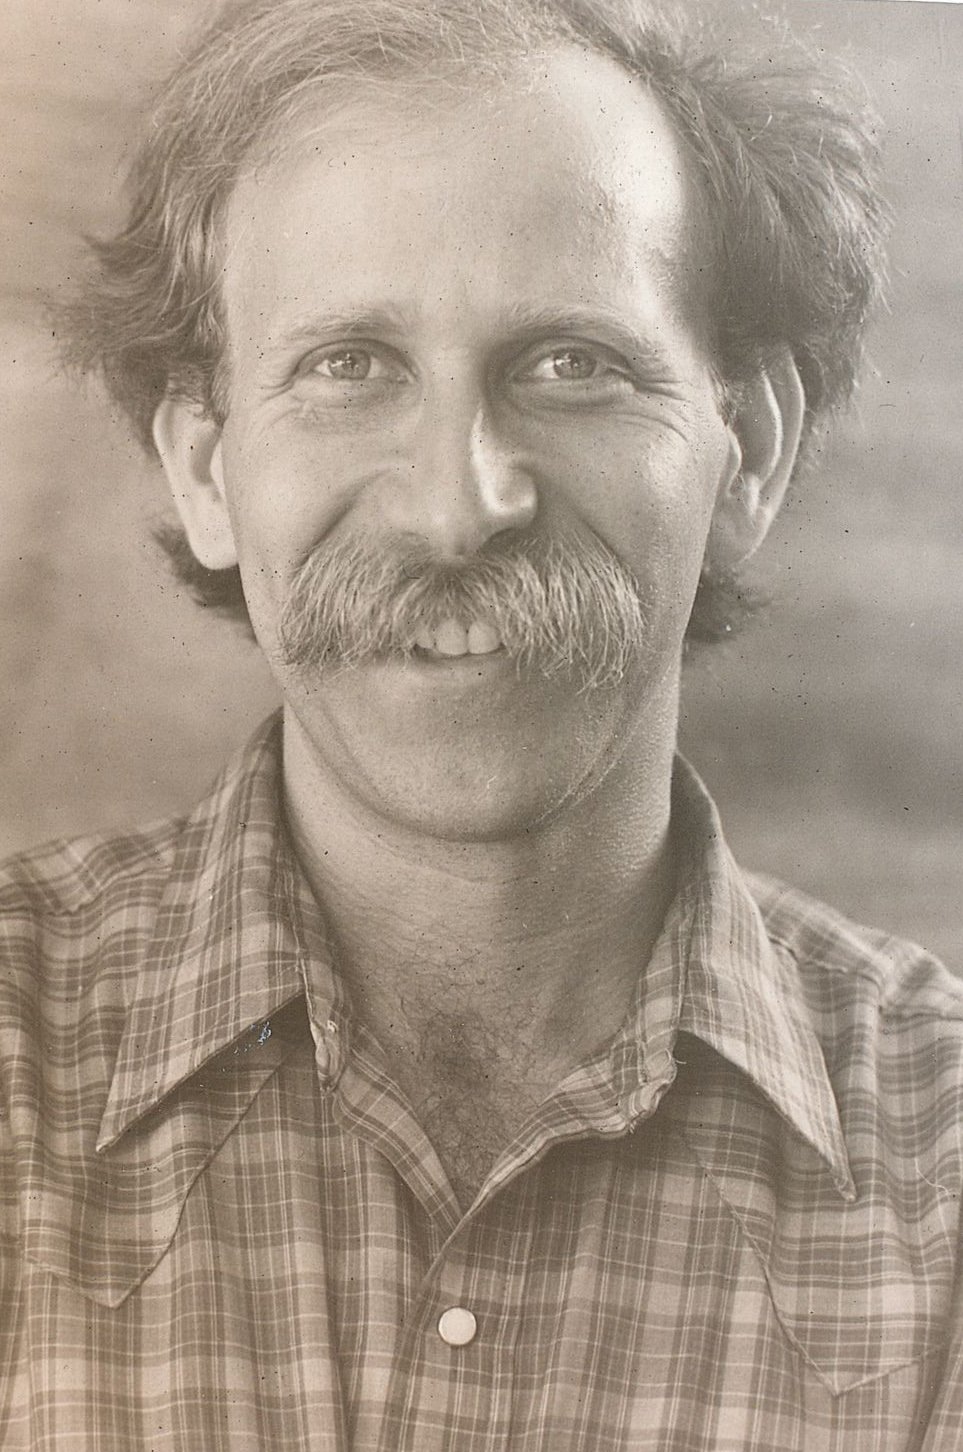 Black and white photo of a man with a large mustache and thinning hair, smiling at the camera. He is wearing a plaid shirt, and the background is blurred to keep the focus on his face, capturing a moment likely familiar to those who have spent time immersed in Berkeley Journalism.